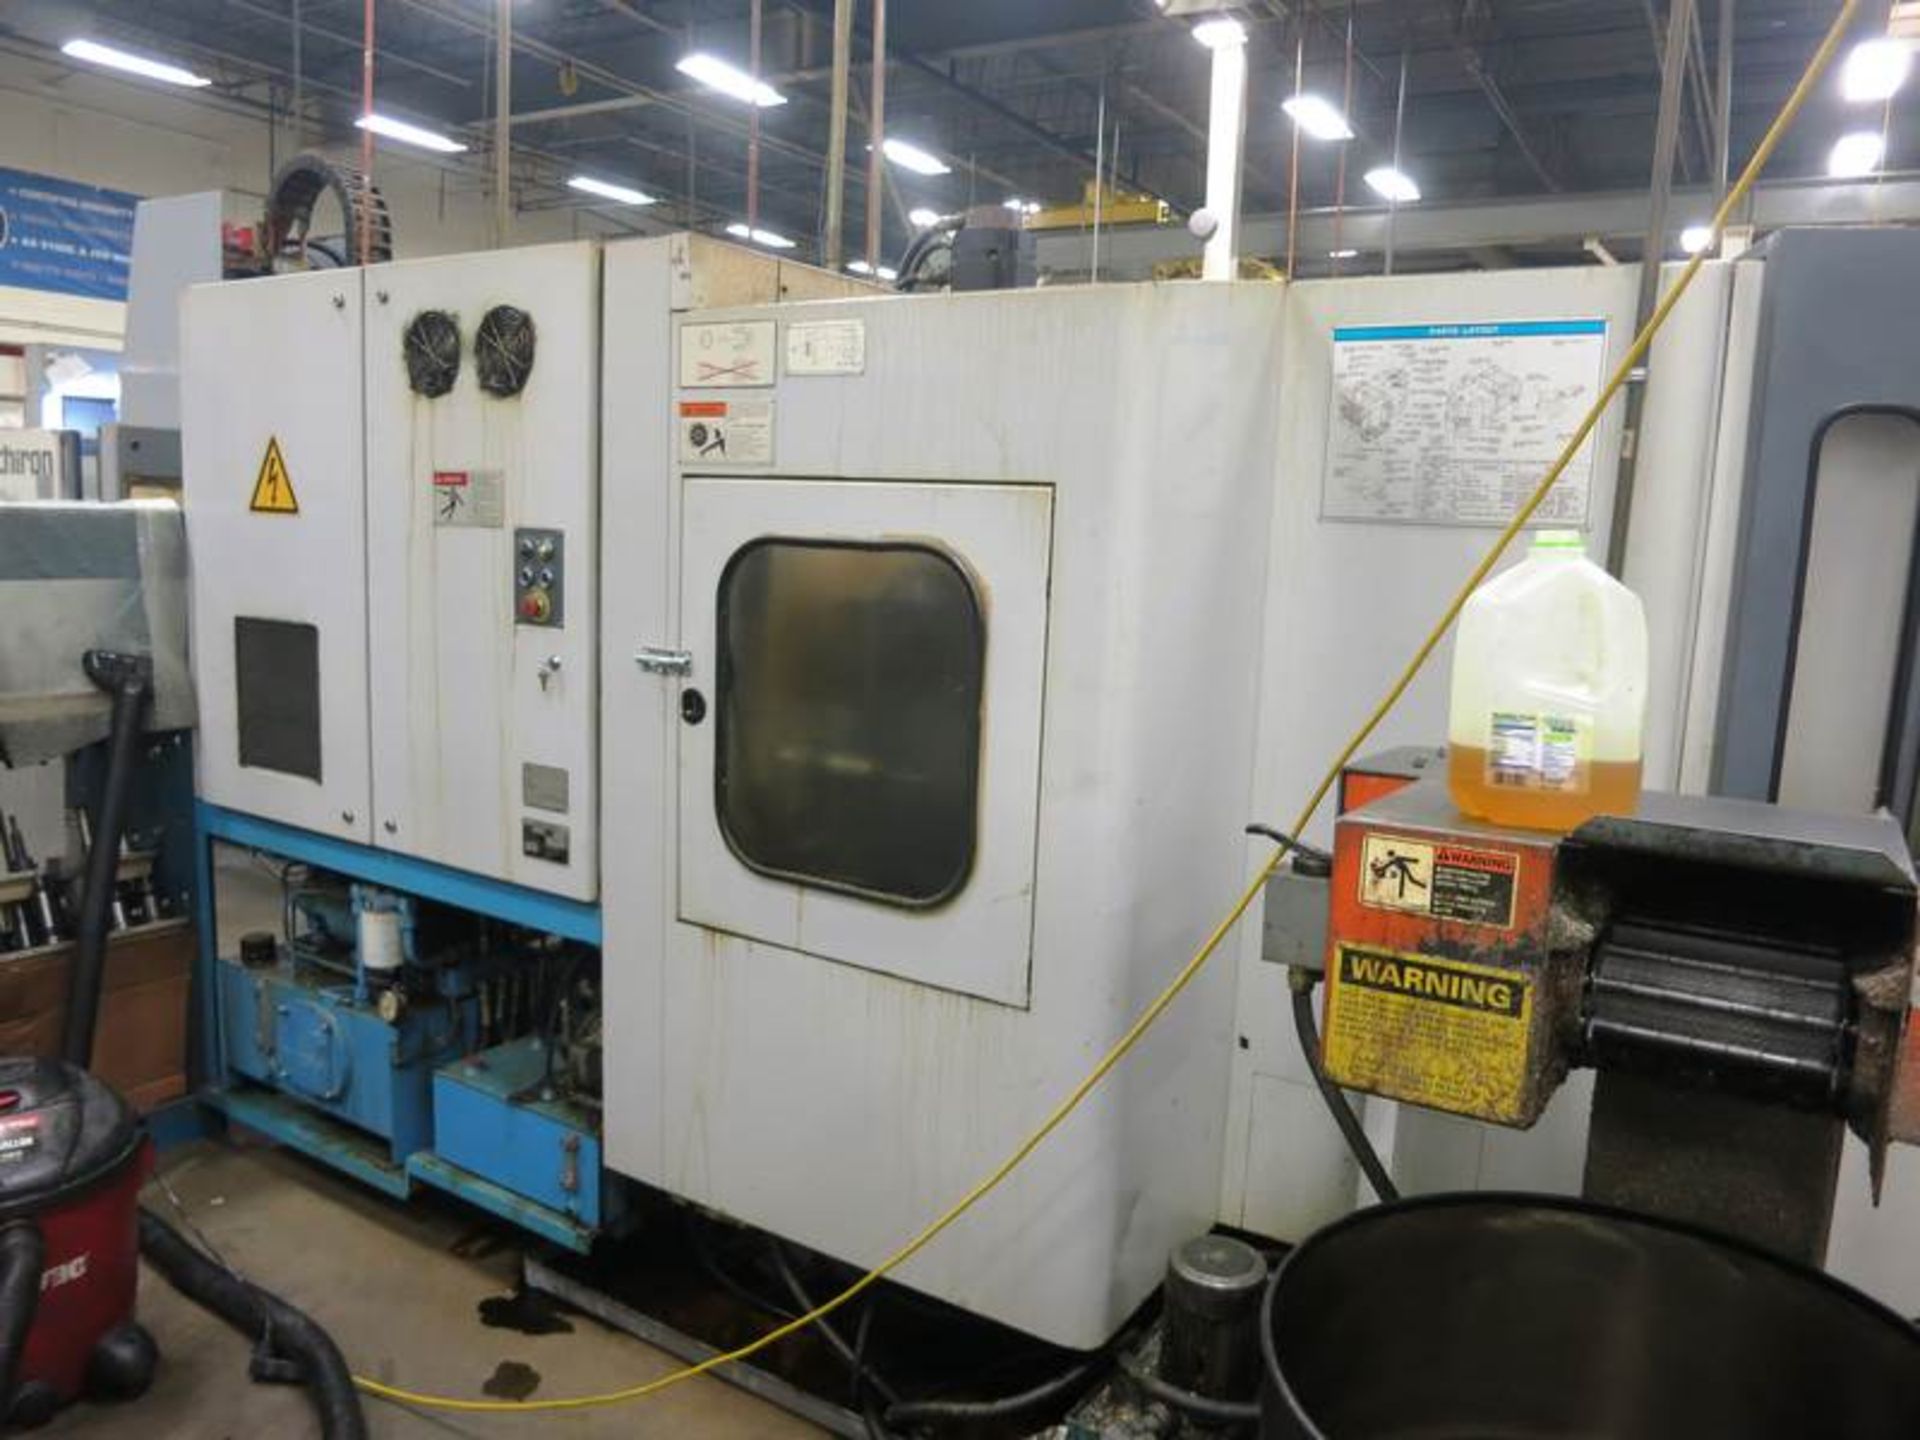 Mazak HTC-400 CNC Horizontal Machining Center, S/N 123467, New 1997 General Specifications, Travel:, - Image 5 of 8